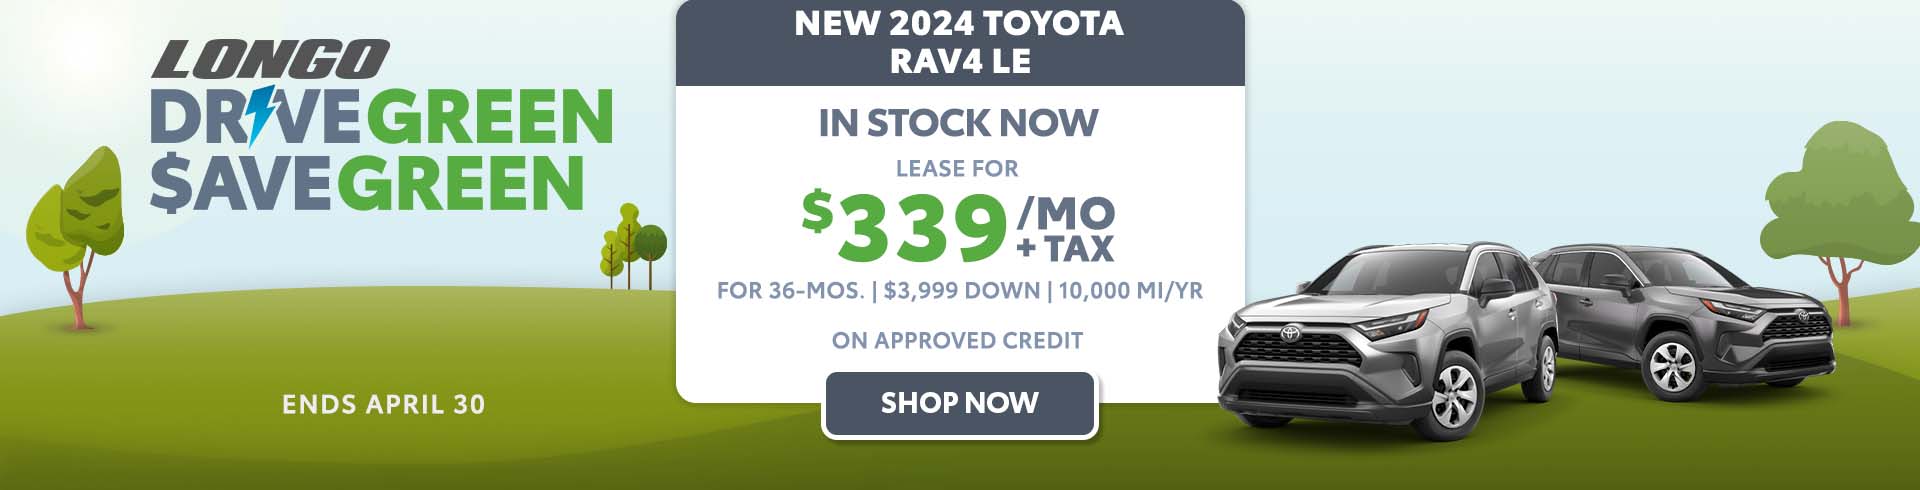 Lease a new 2024 Toyota RAV4 LE for $339/mo + tax